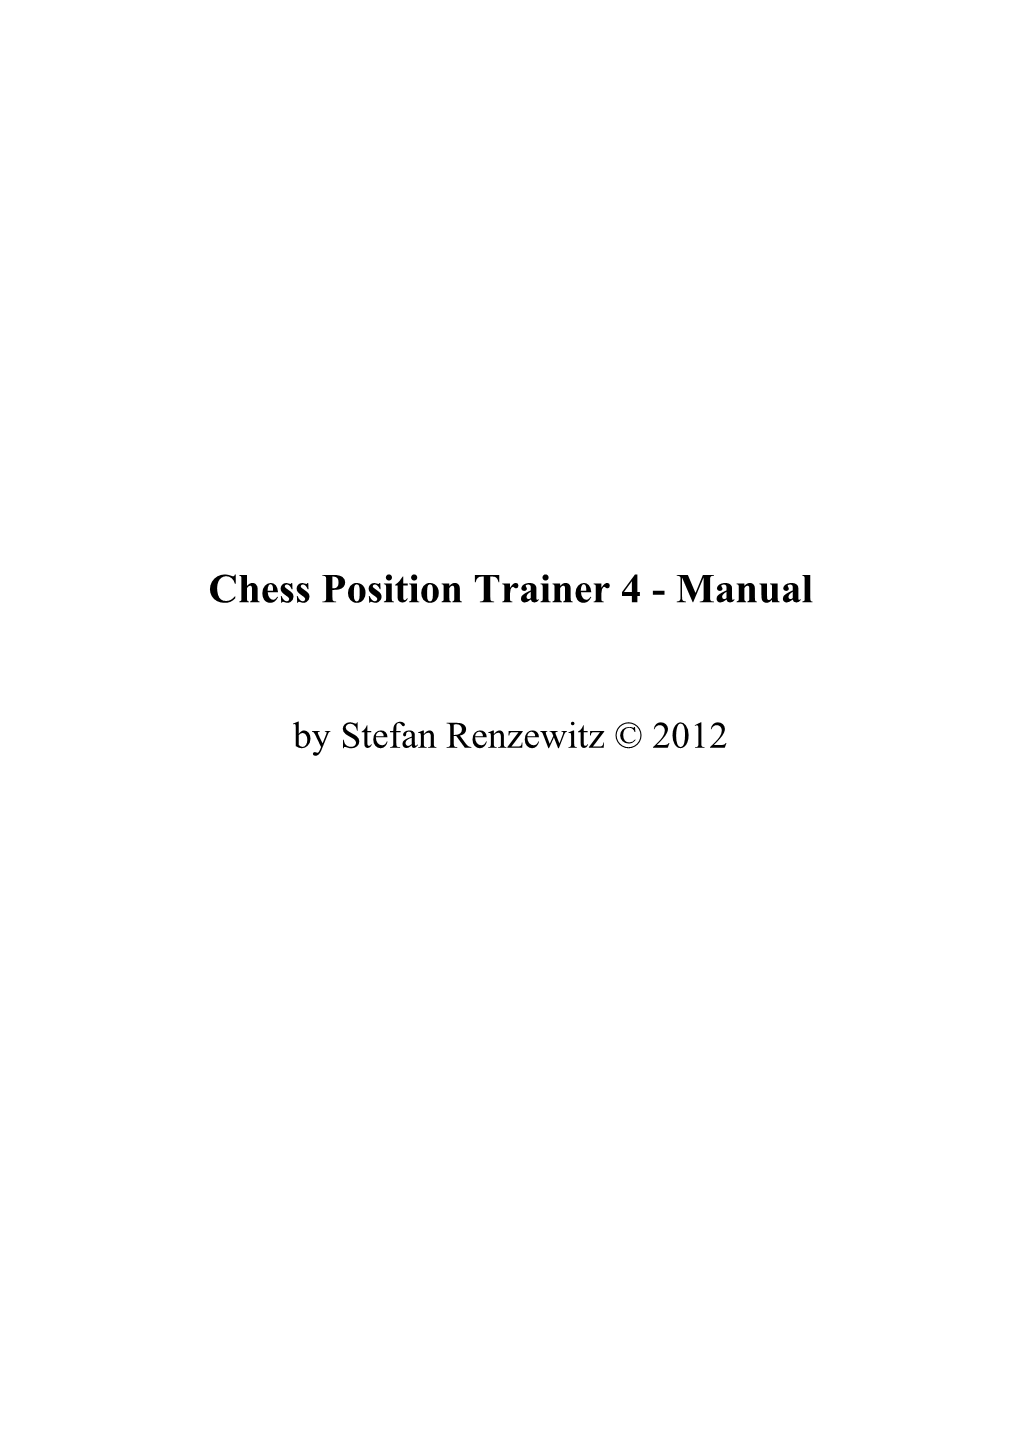 Chess Position Trainer 4 - Manual